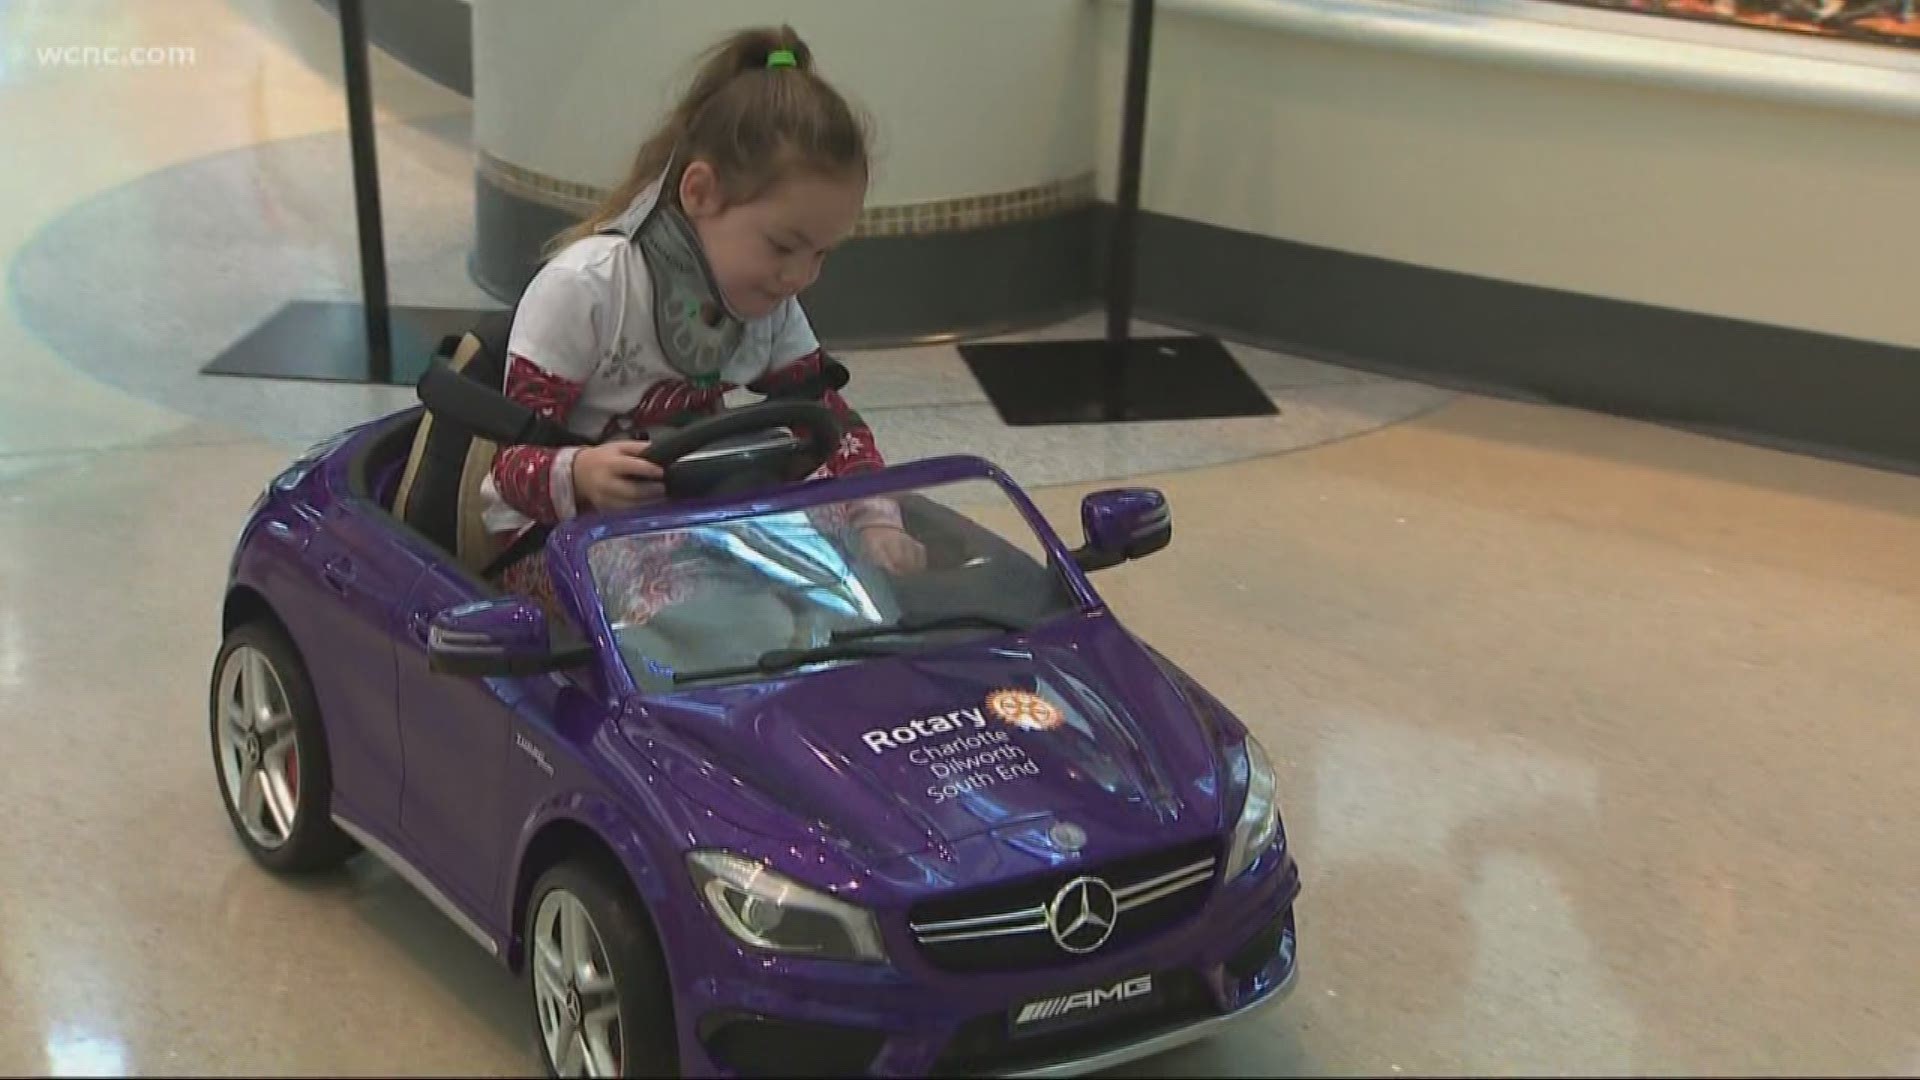 Recognizing the need to ease young patients? worries about surgery, the Dilworth South End Rotary identified mini-cars as a fun solution for patients and families, allowing children to forget their fears and ride in luxury to the operating room.